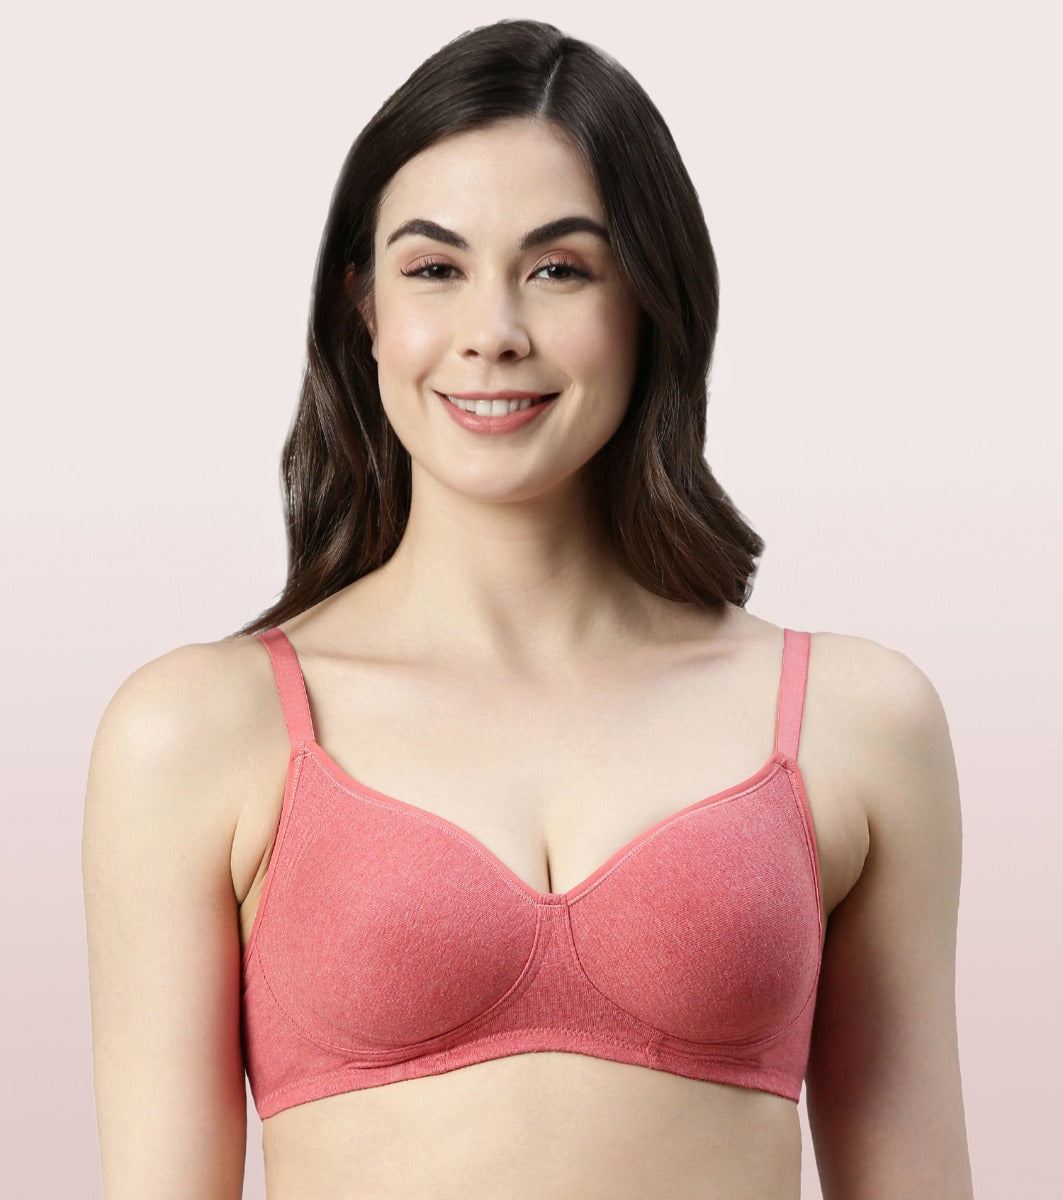 Enamor A014 Full Support Cotton Bra - M-Frame High Coverage Non-Padded  Wirefree - Blue 42B in Kolkata at best price by Trends (Axis Mall) -  Justdial